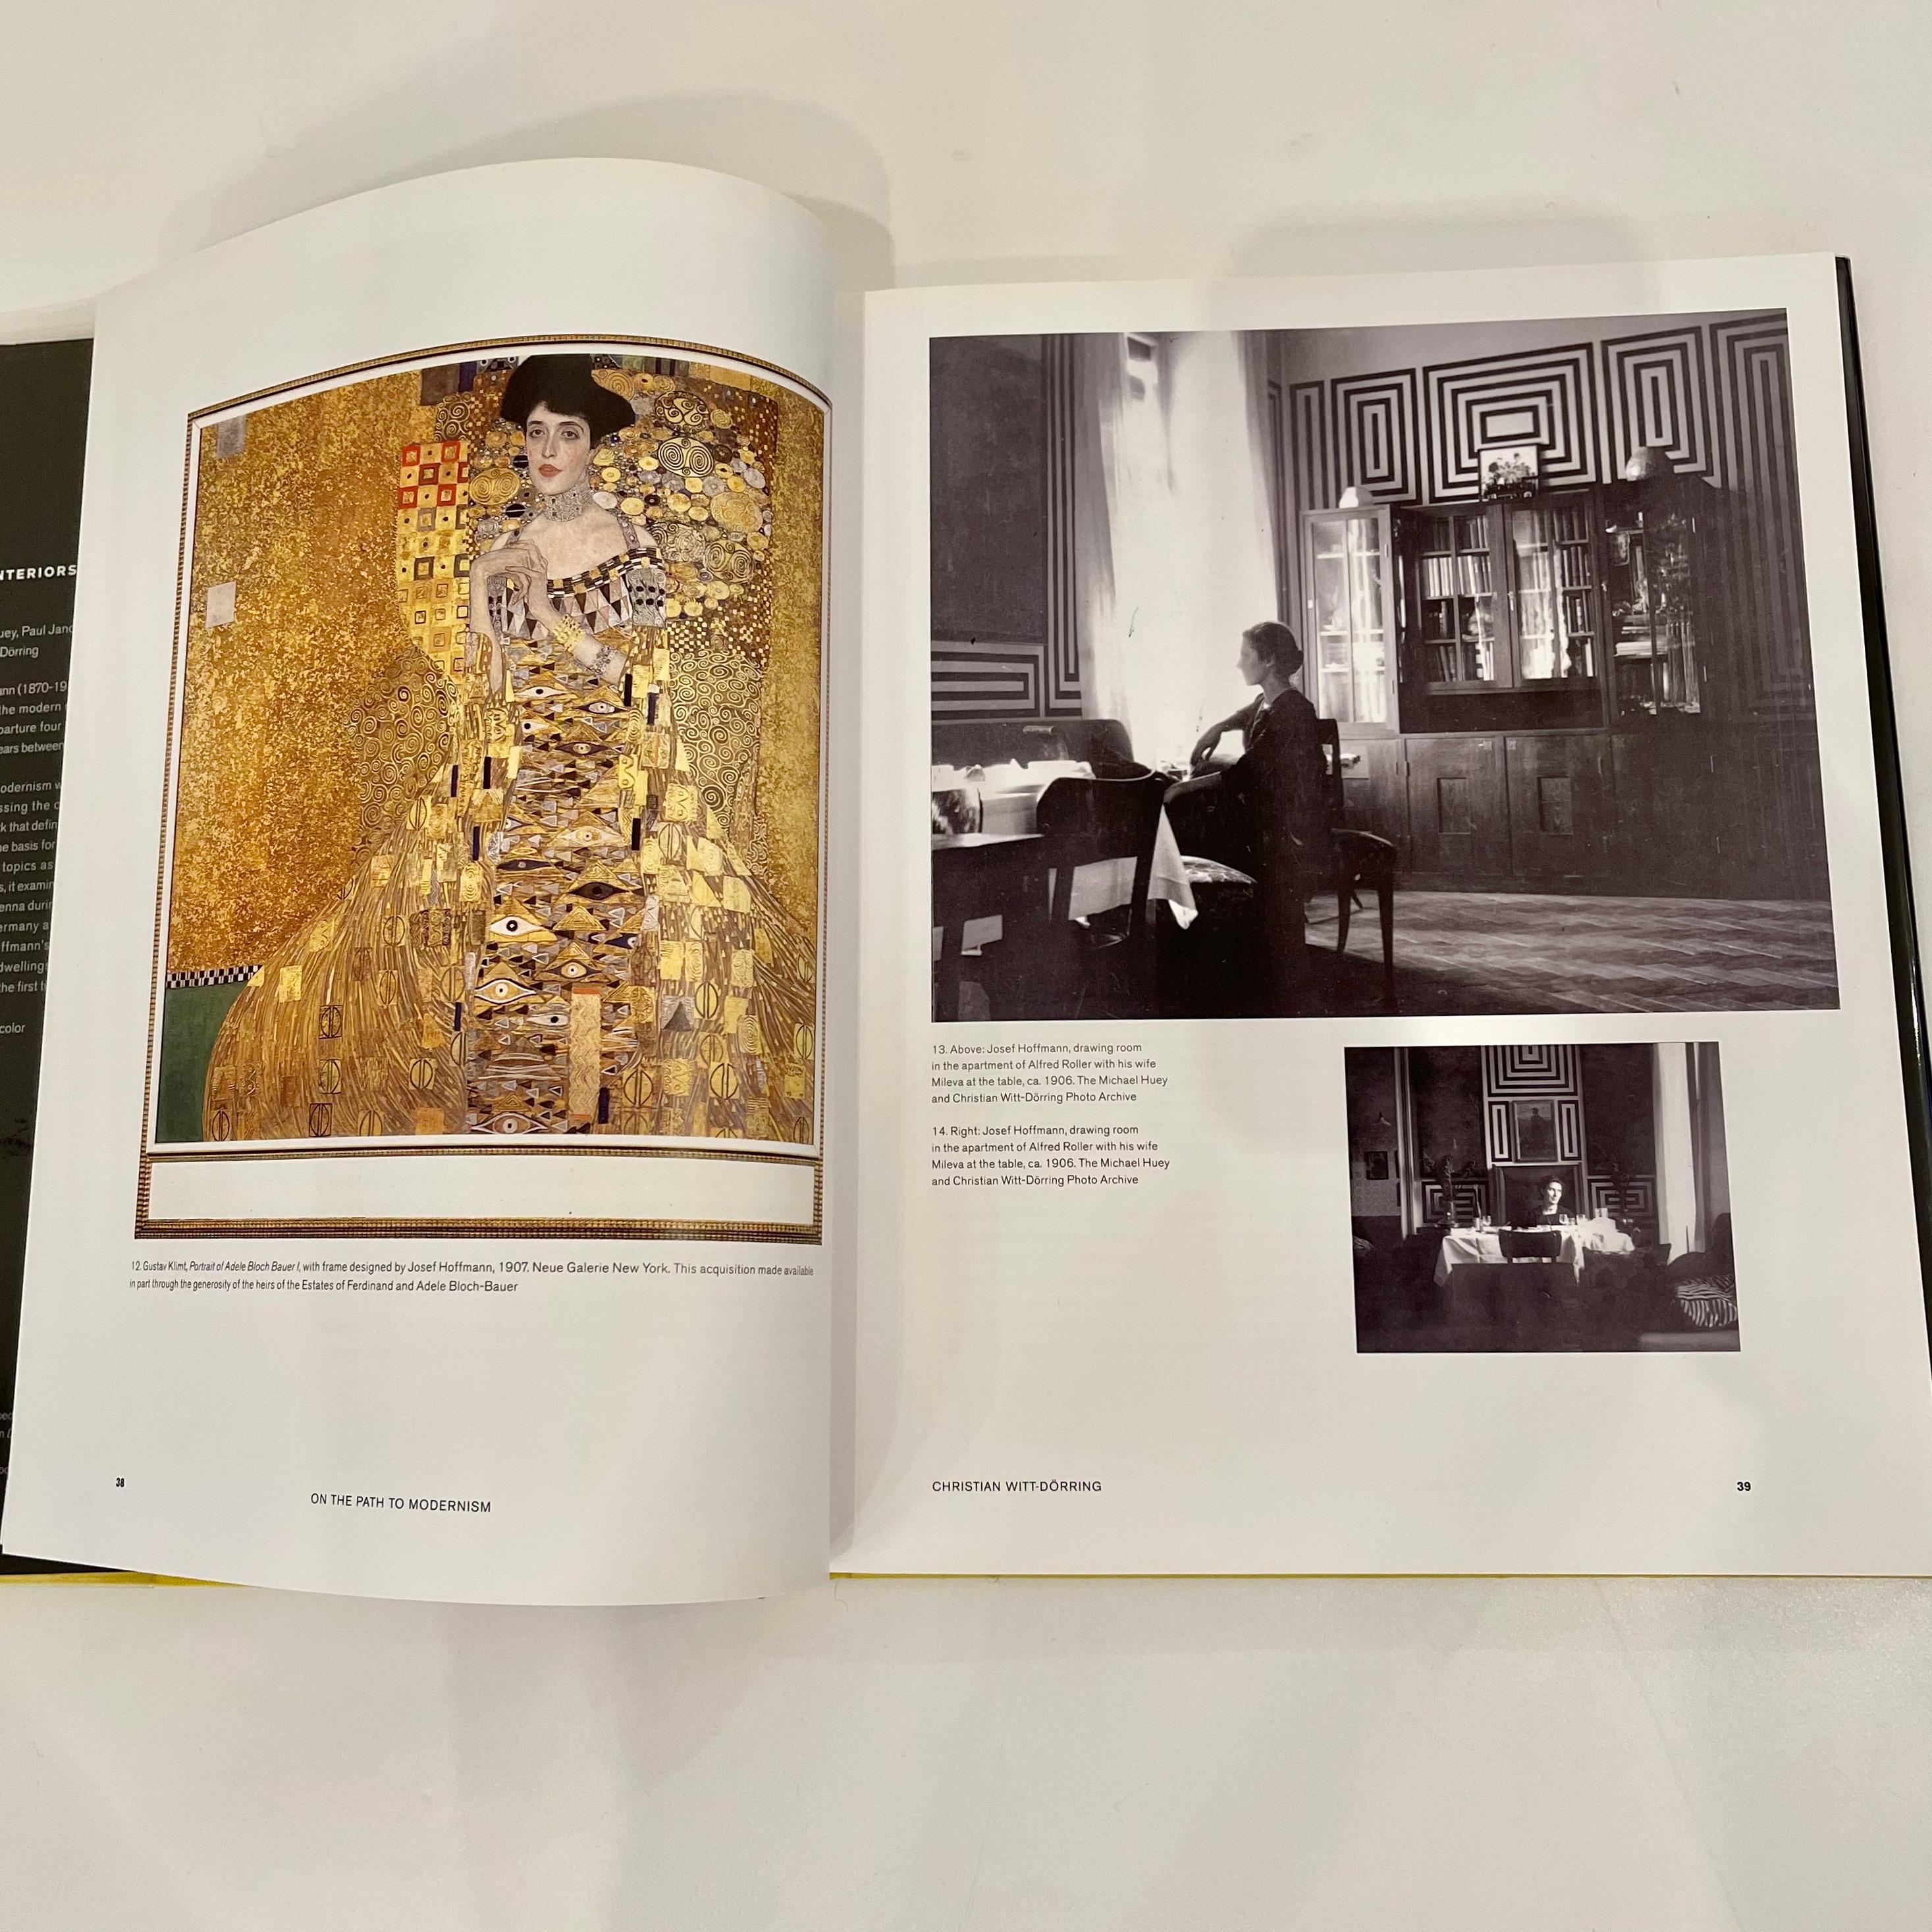 First edition, published by Prestel in 2006 in conjunction with the exhibition of the same name at Neue Gallerie, New York, November 2006 - February 2007.

An in-depth look at the pioneering modern interiors of Austrian Architect Josef Hoffmann